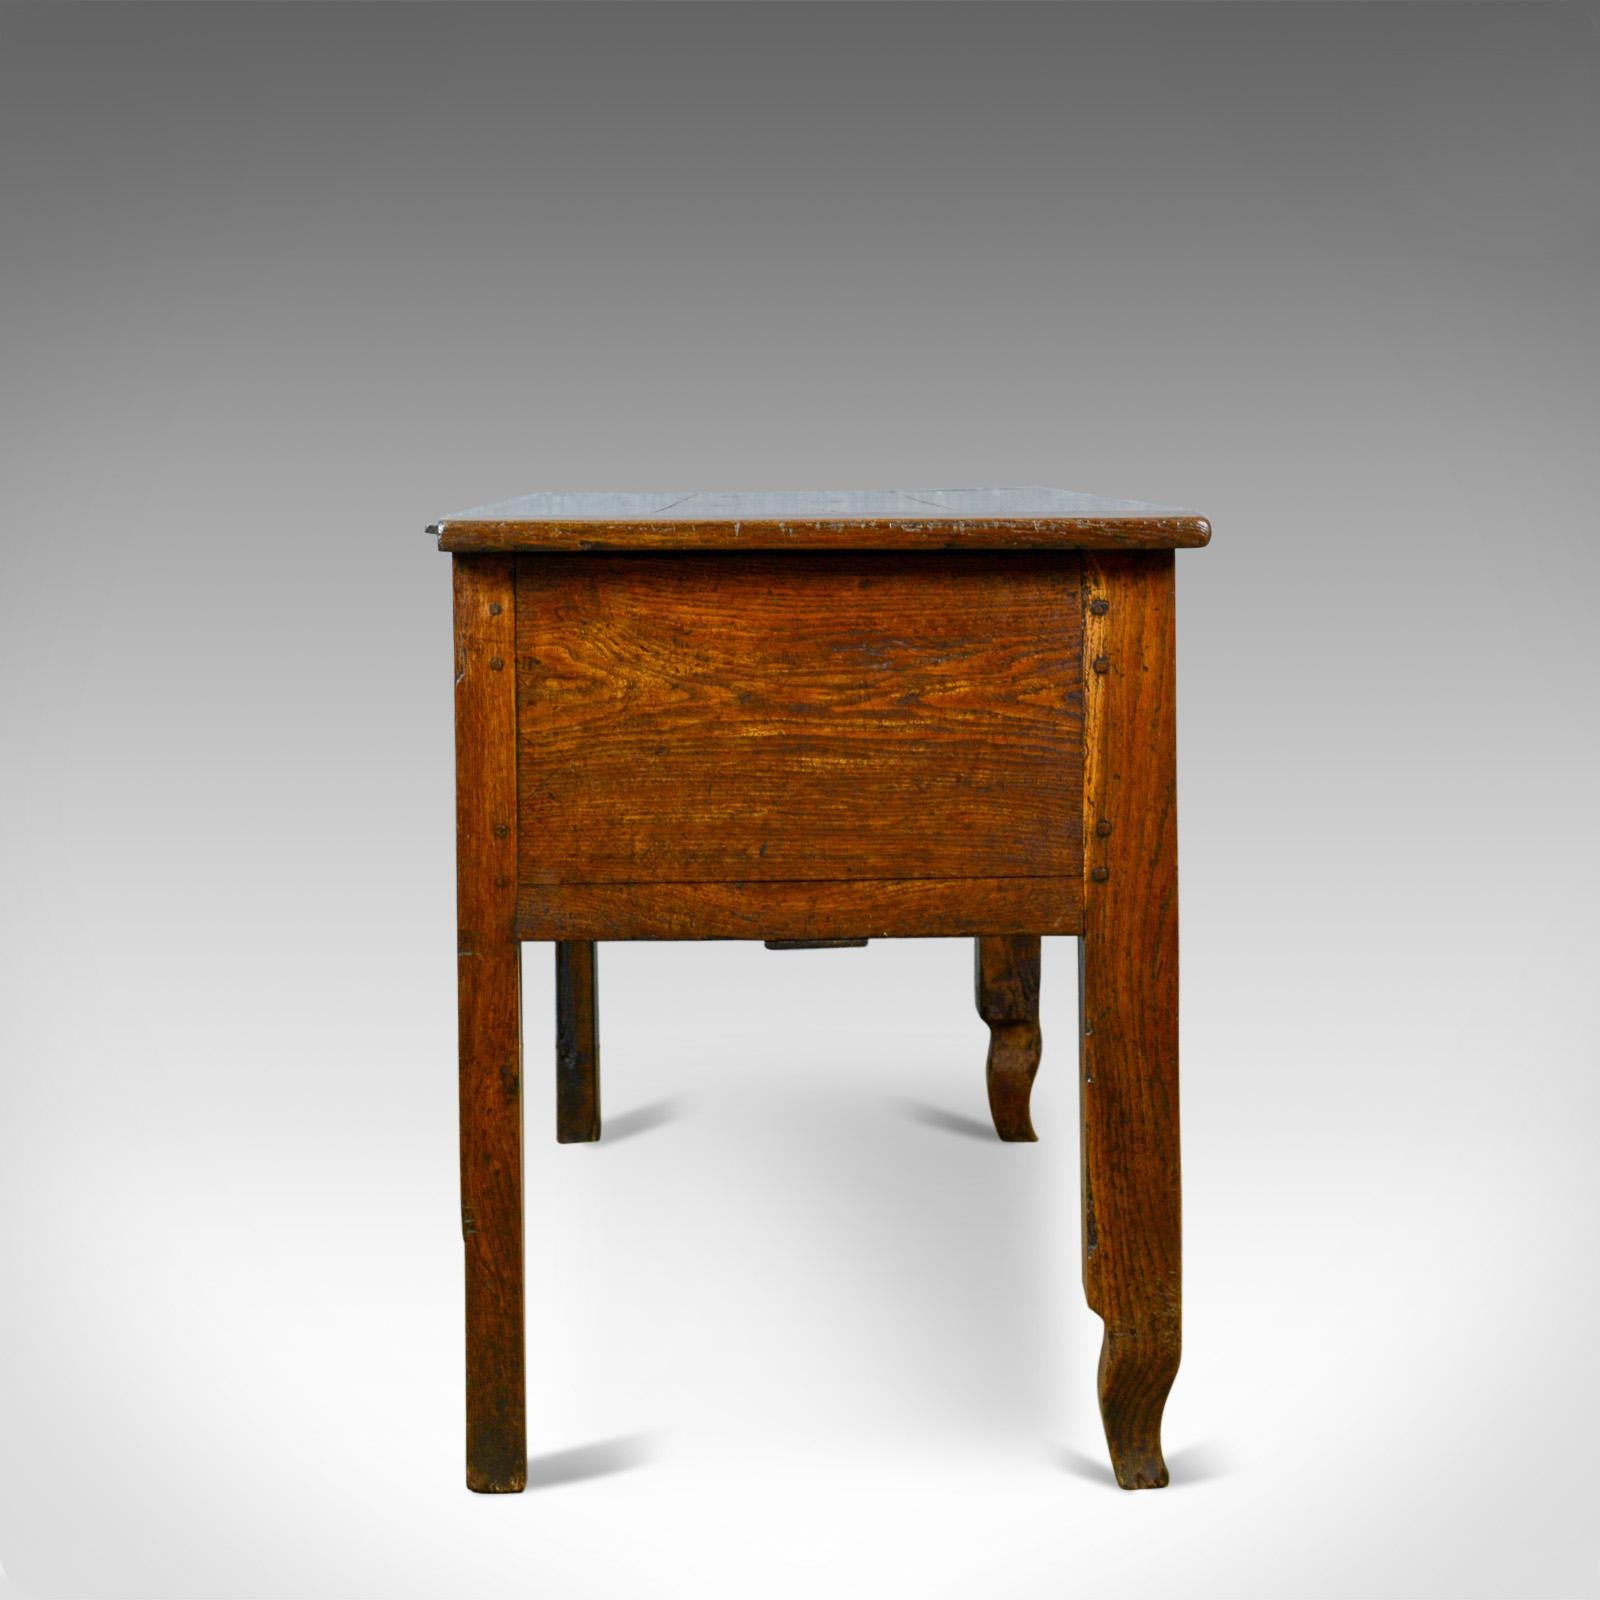 French Provincial Antique Dough Bin, Large, French, Fruitwood, Proving Chest, Mid-19th Century